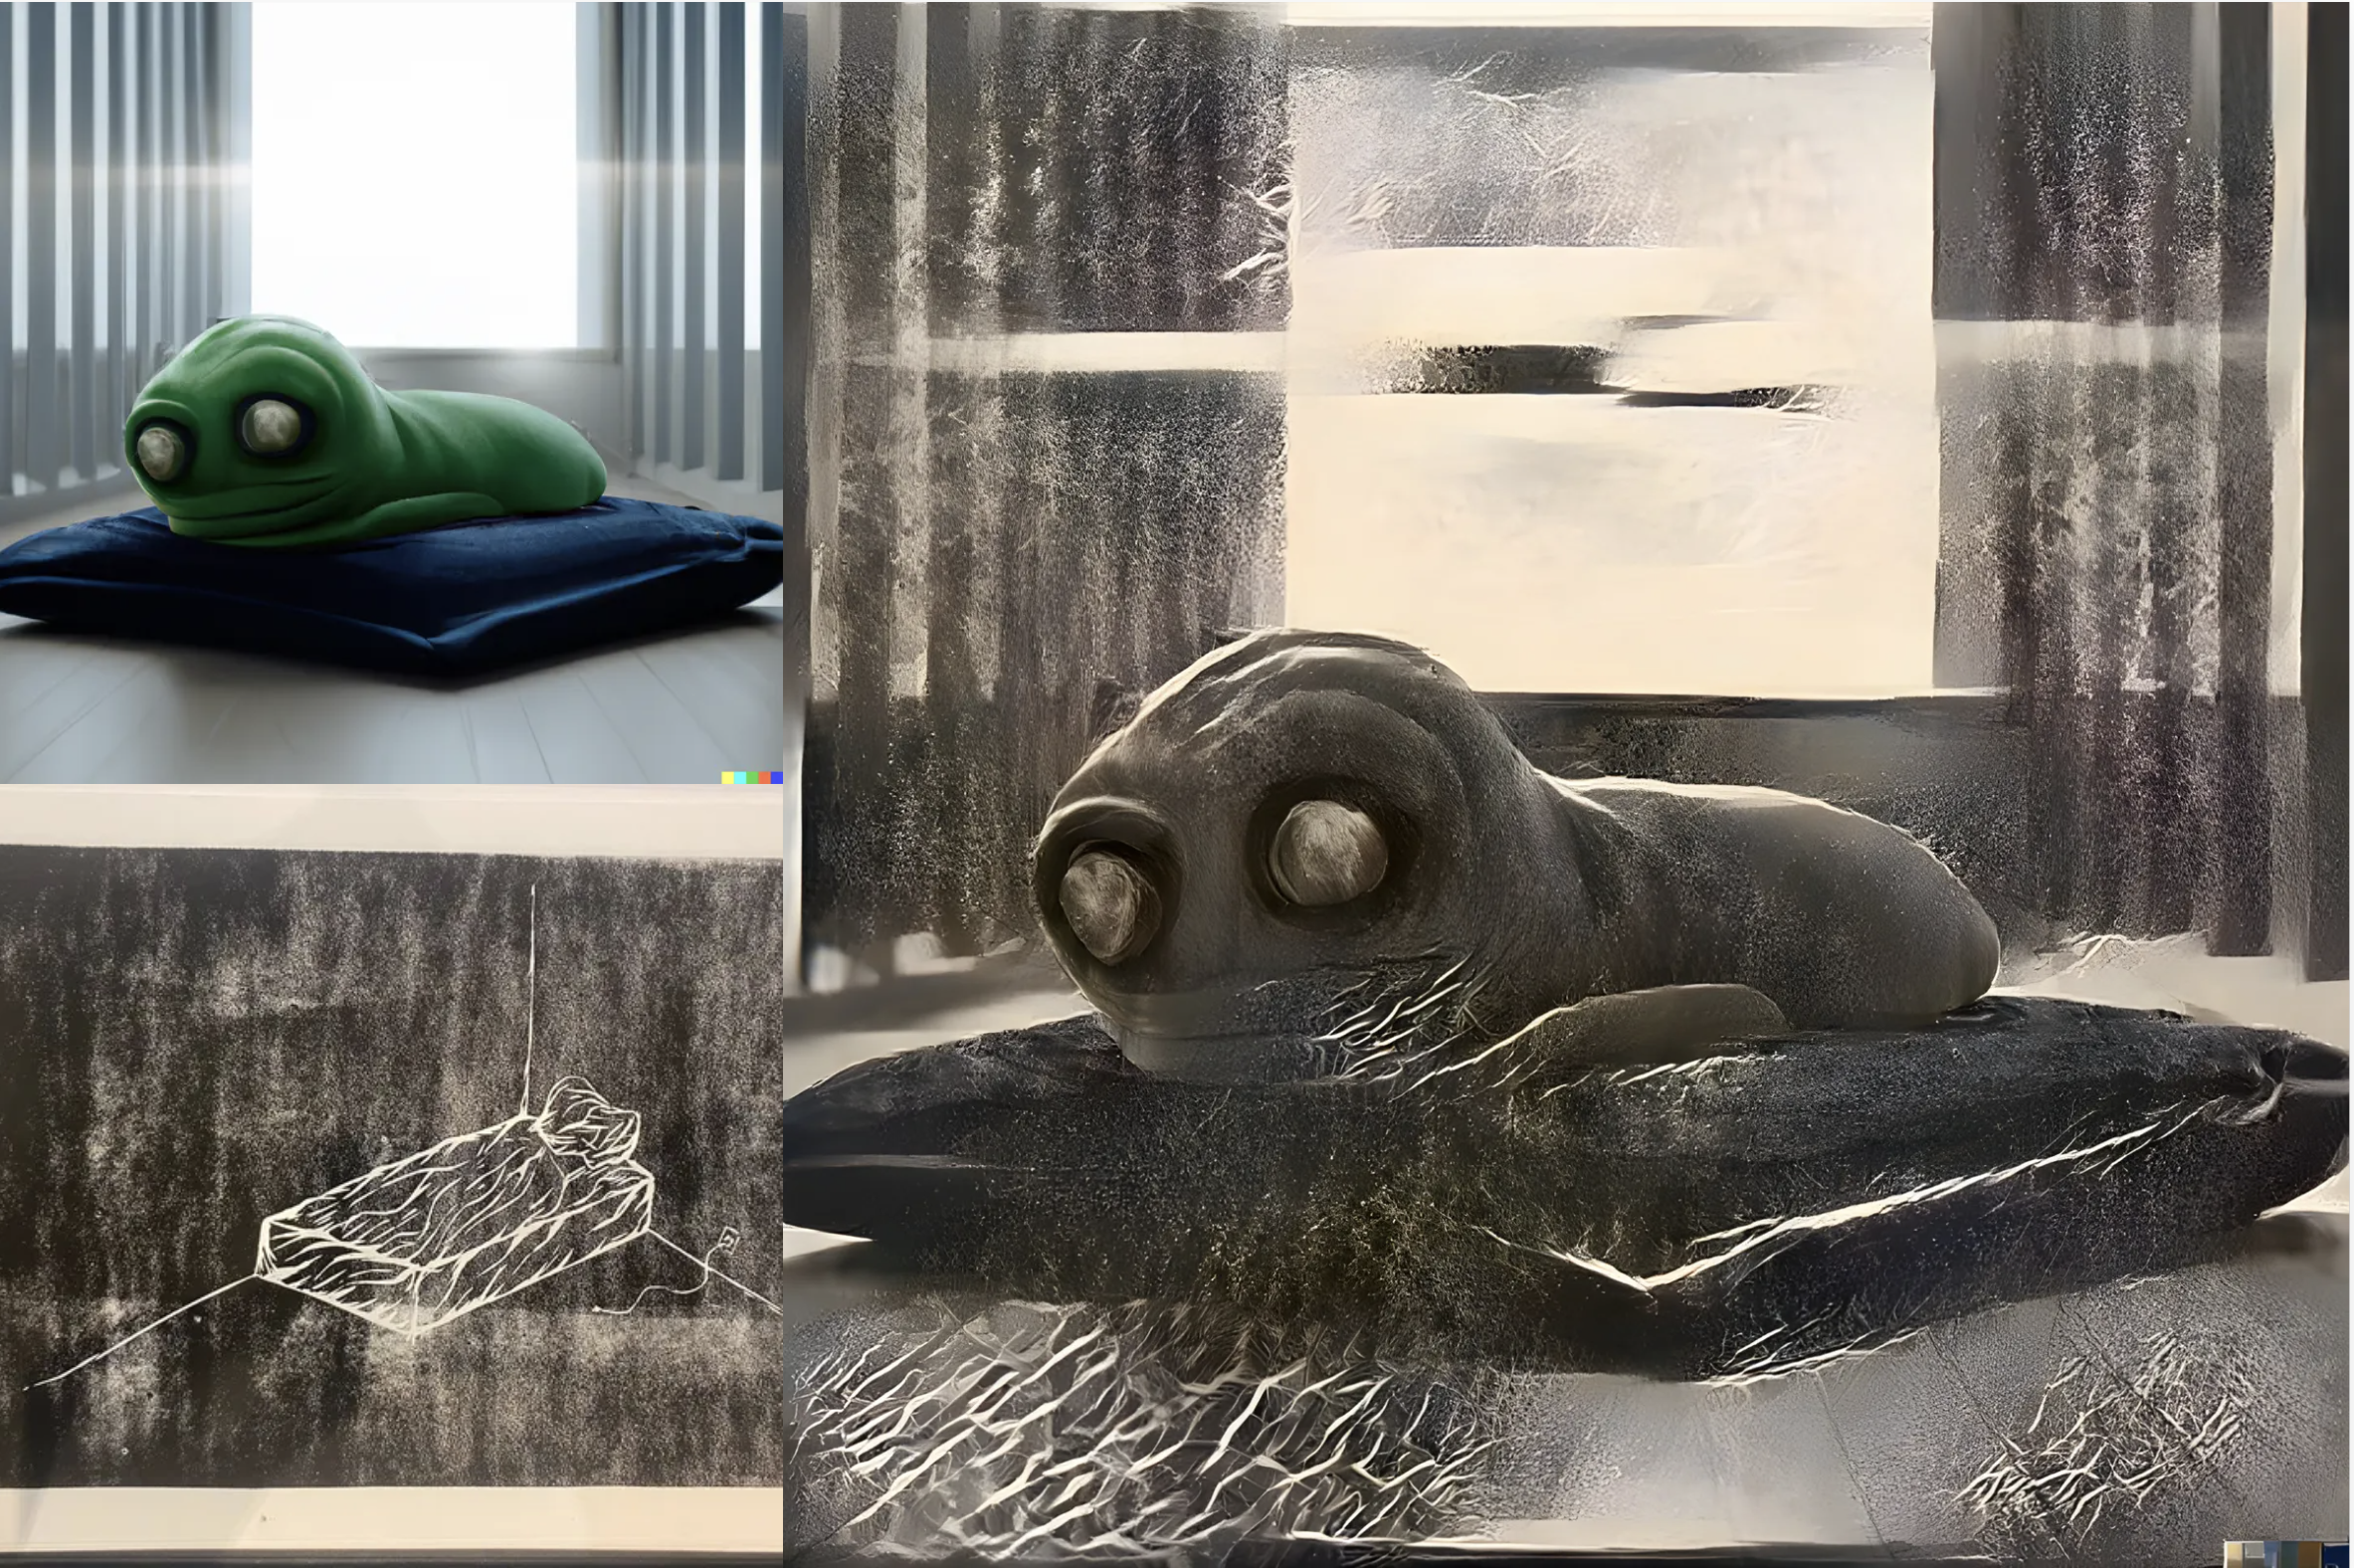 Process, between digital asset and hand made artwork (engraving and oil painting)